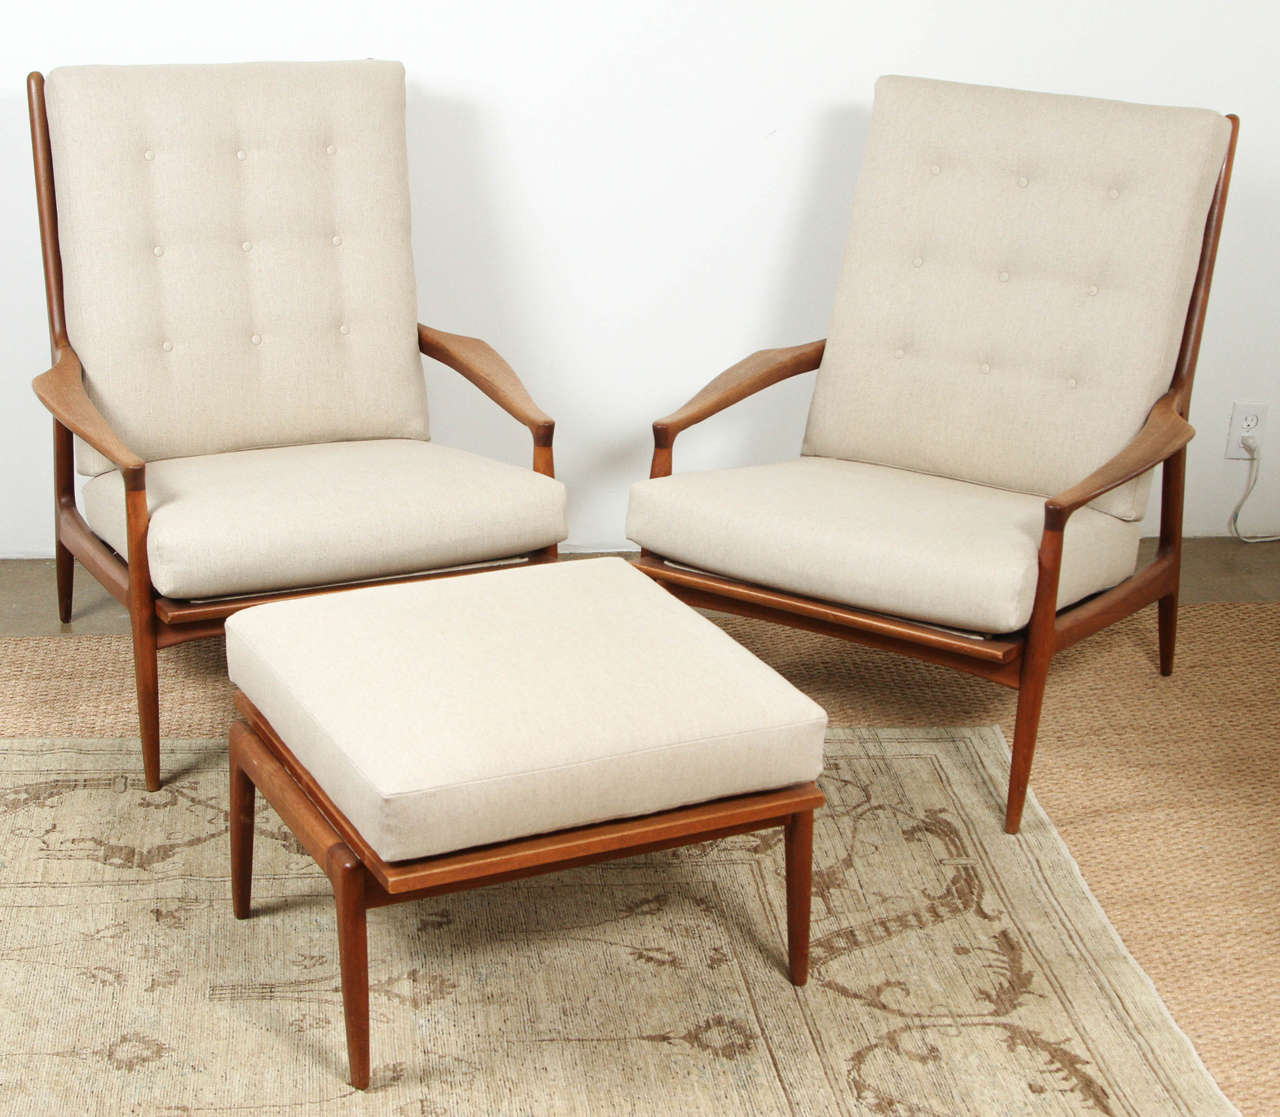 Pair of high backed beautifully sculpted Milo Baughman chairs. With tufted beige linen back and seat. Sculpted arms and back with see thru component. Stately and stunning! And very comfortable.